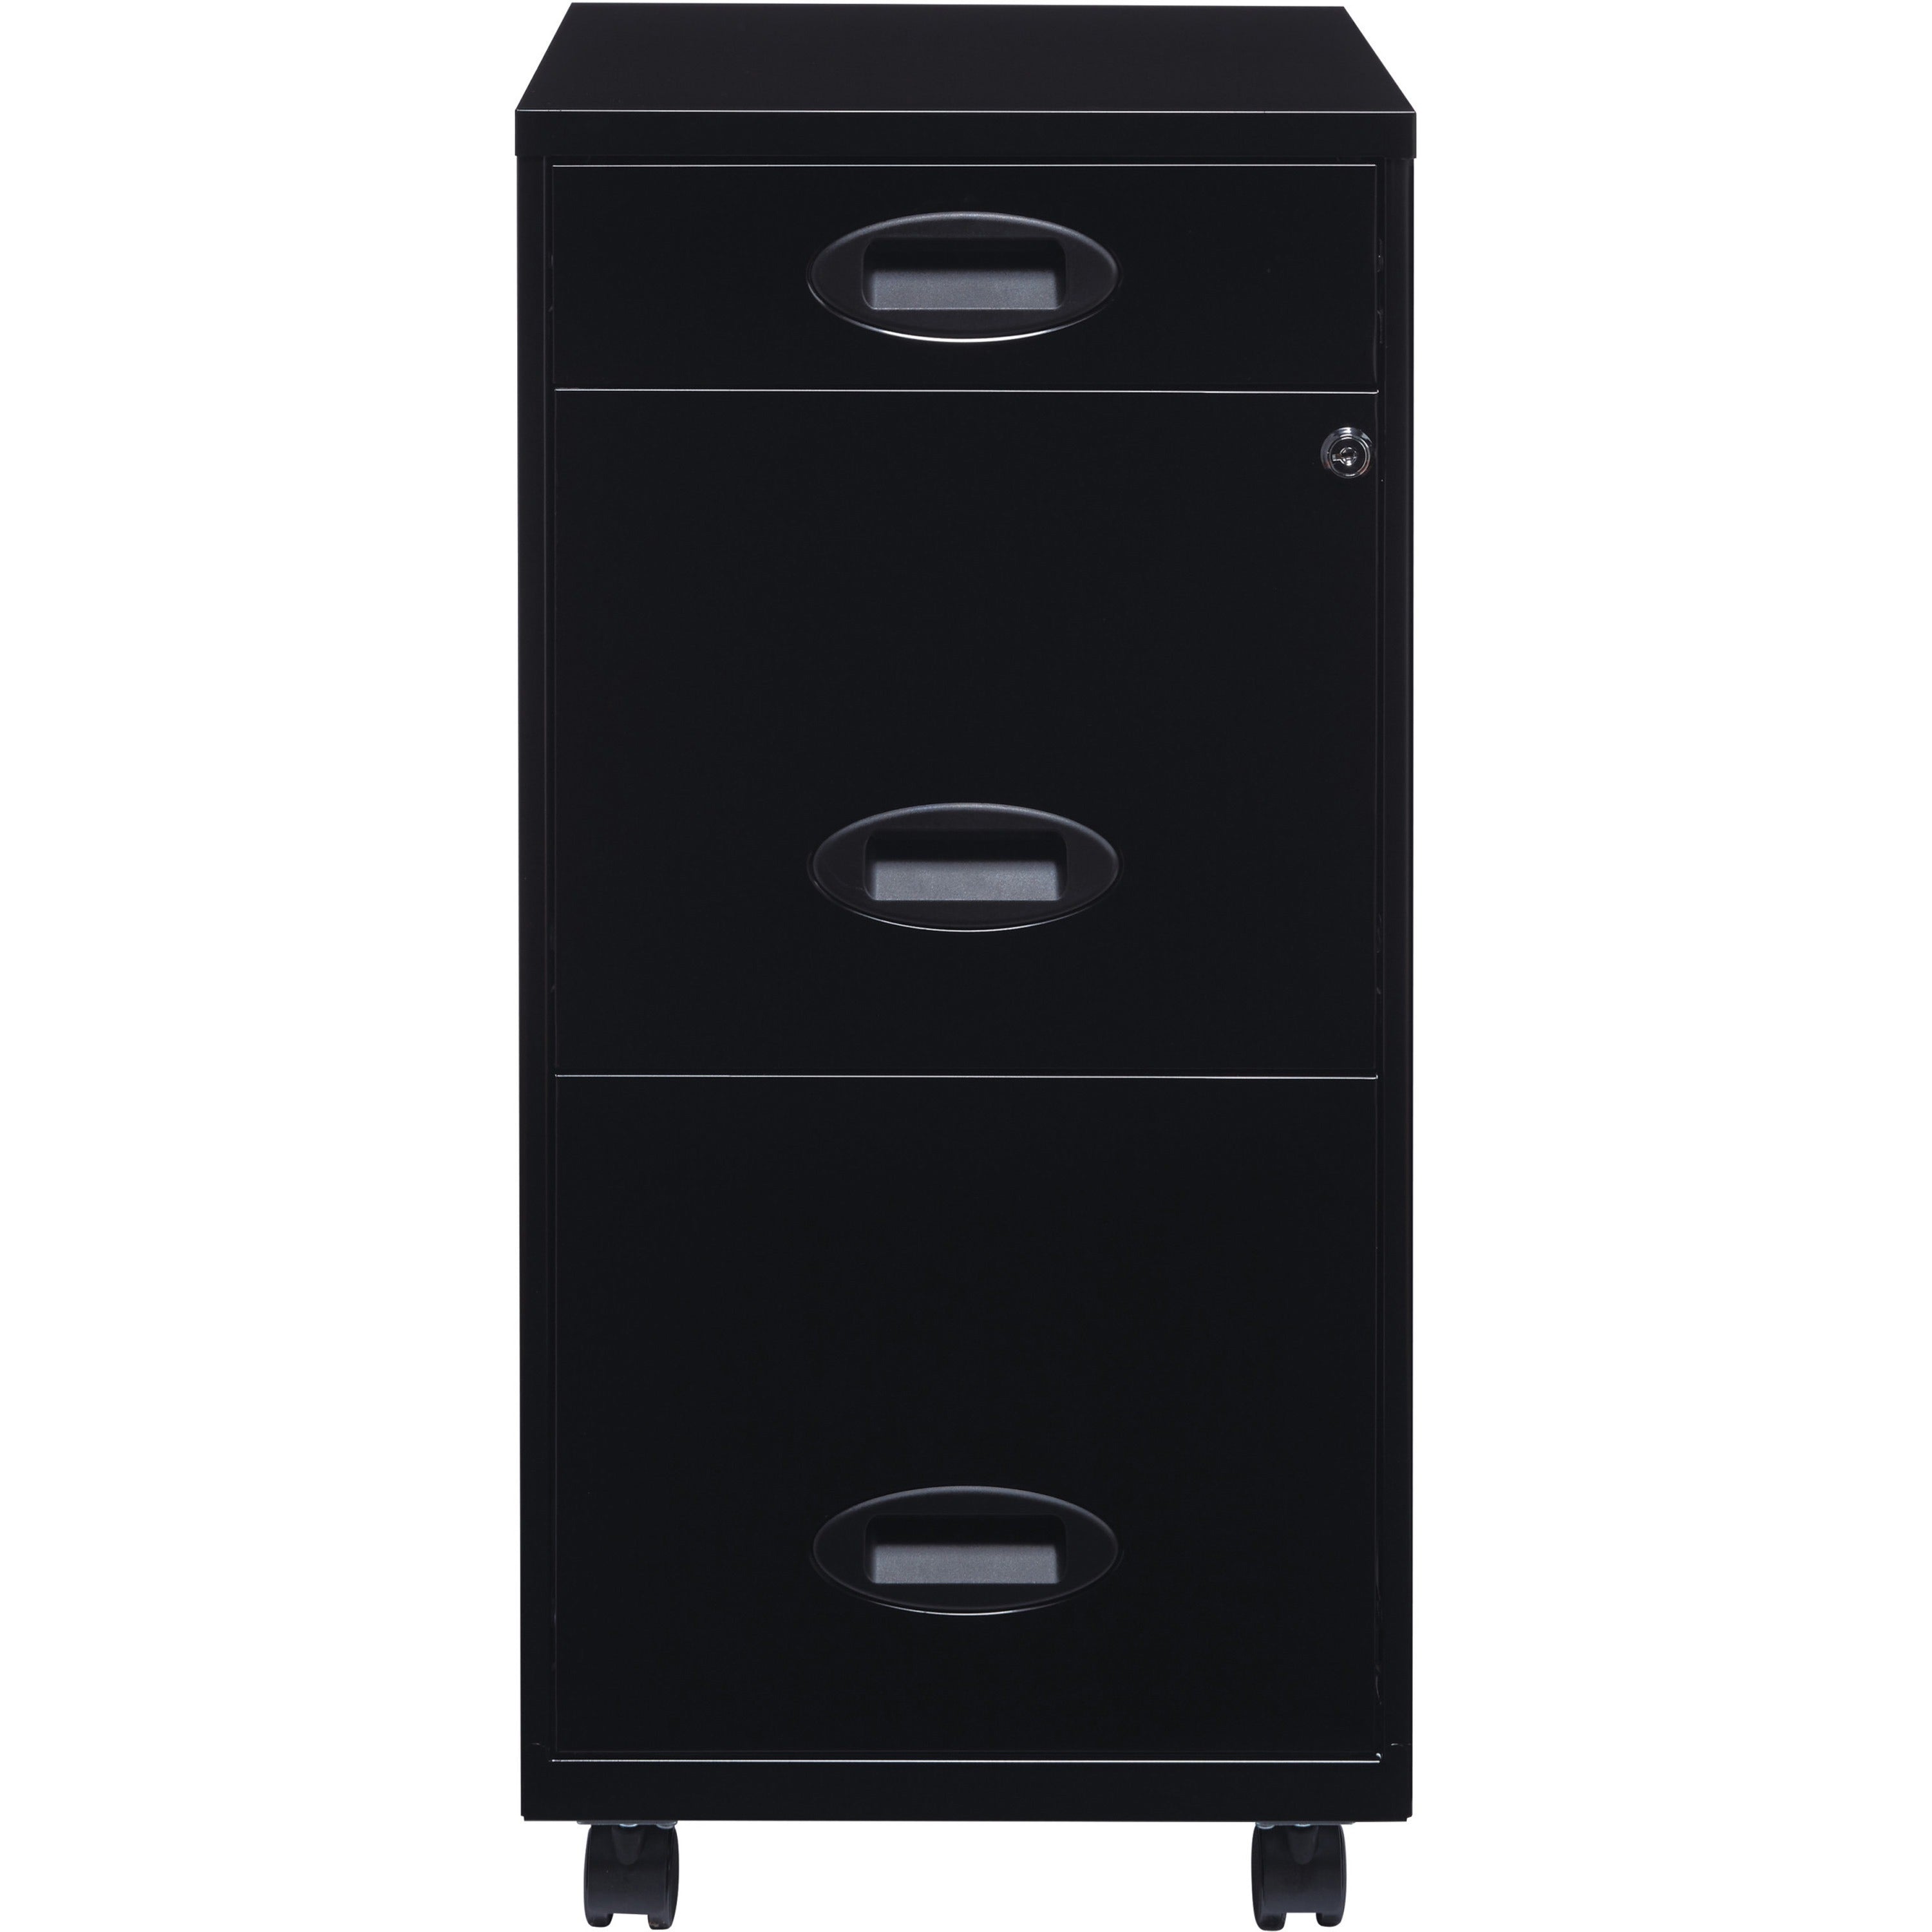 nusparc-file-cabinet-142-x-18-x-295-3-x-drawers-for-pencil-file-letter-vertical-mobility-glide-suspension-drawer-extension-anti-tip-lockable-wheels-nonporous-surface-black-painted-steel-recycled_nprvf318embk - 2